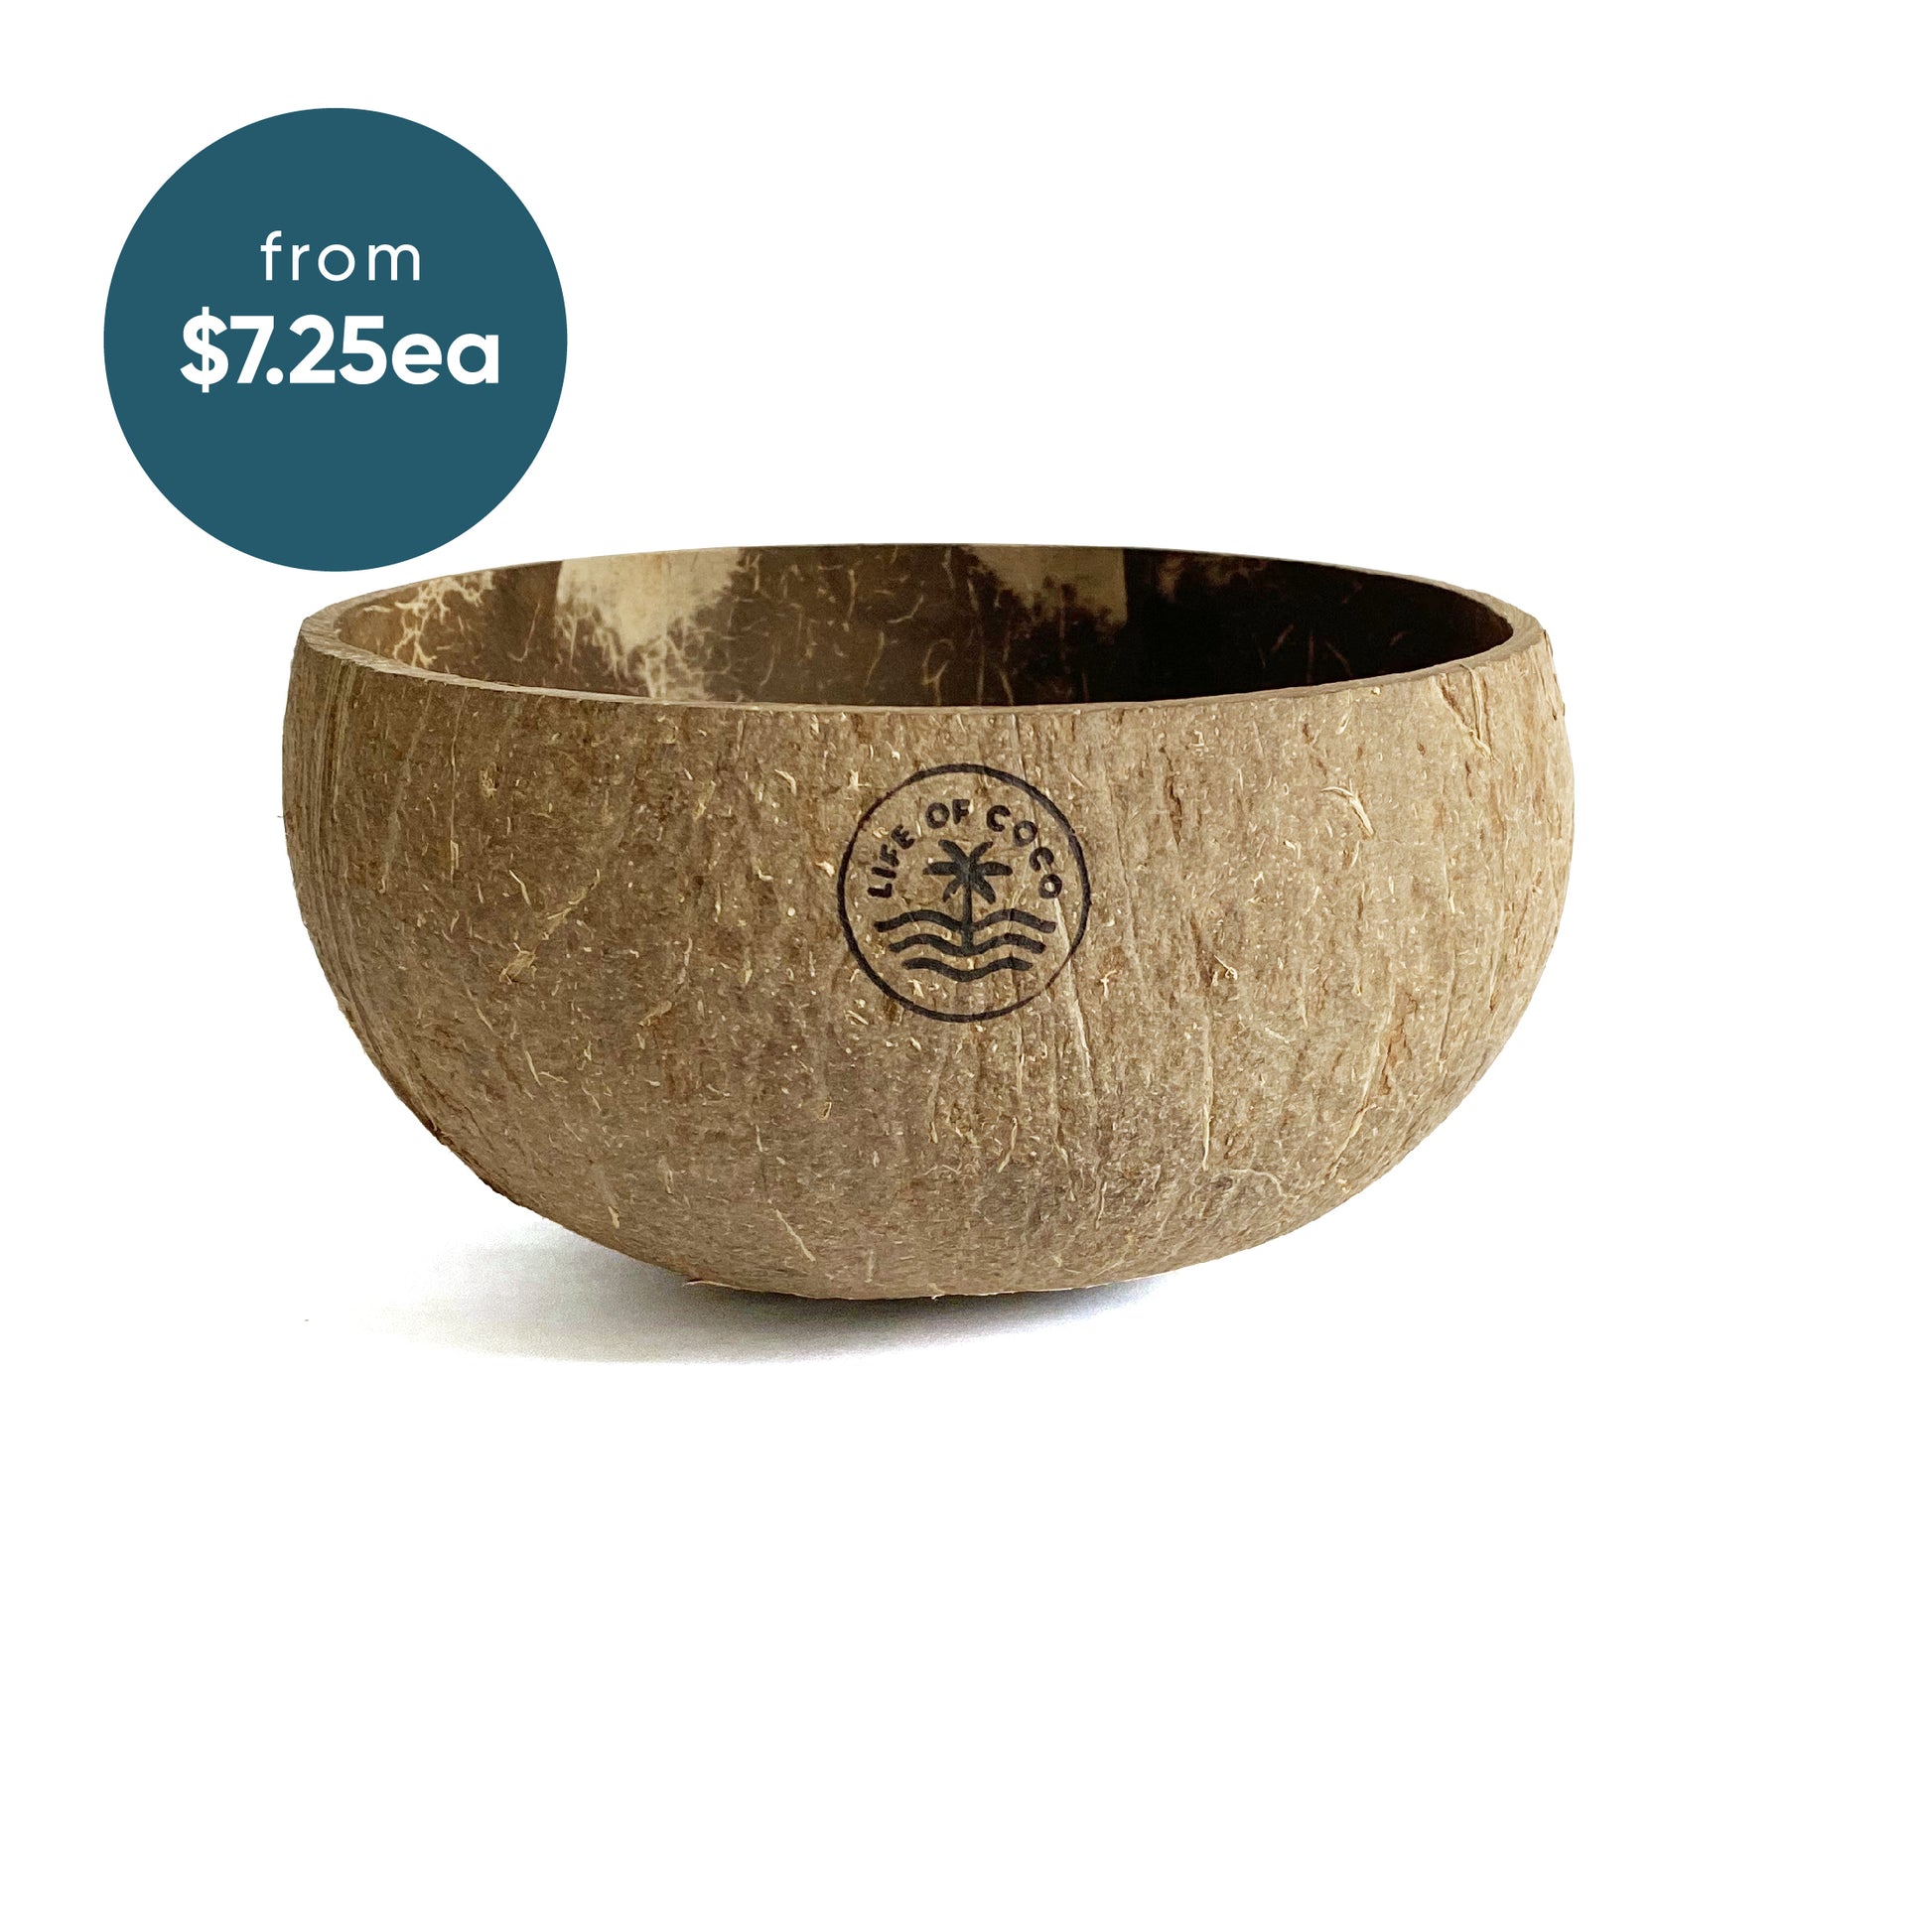 life of coco wholesale coconut bowl jumbo natural